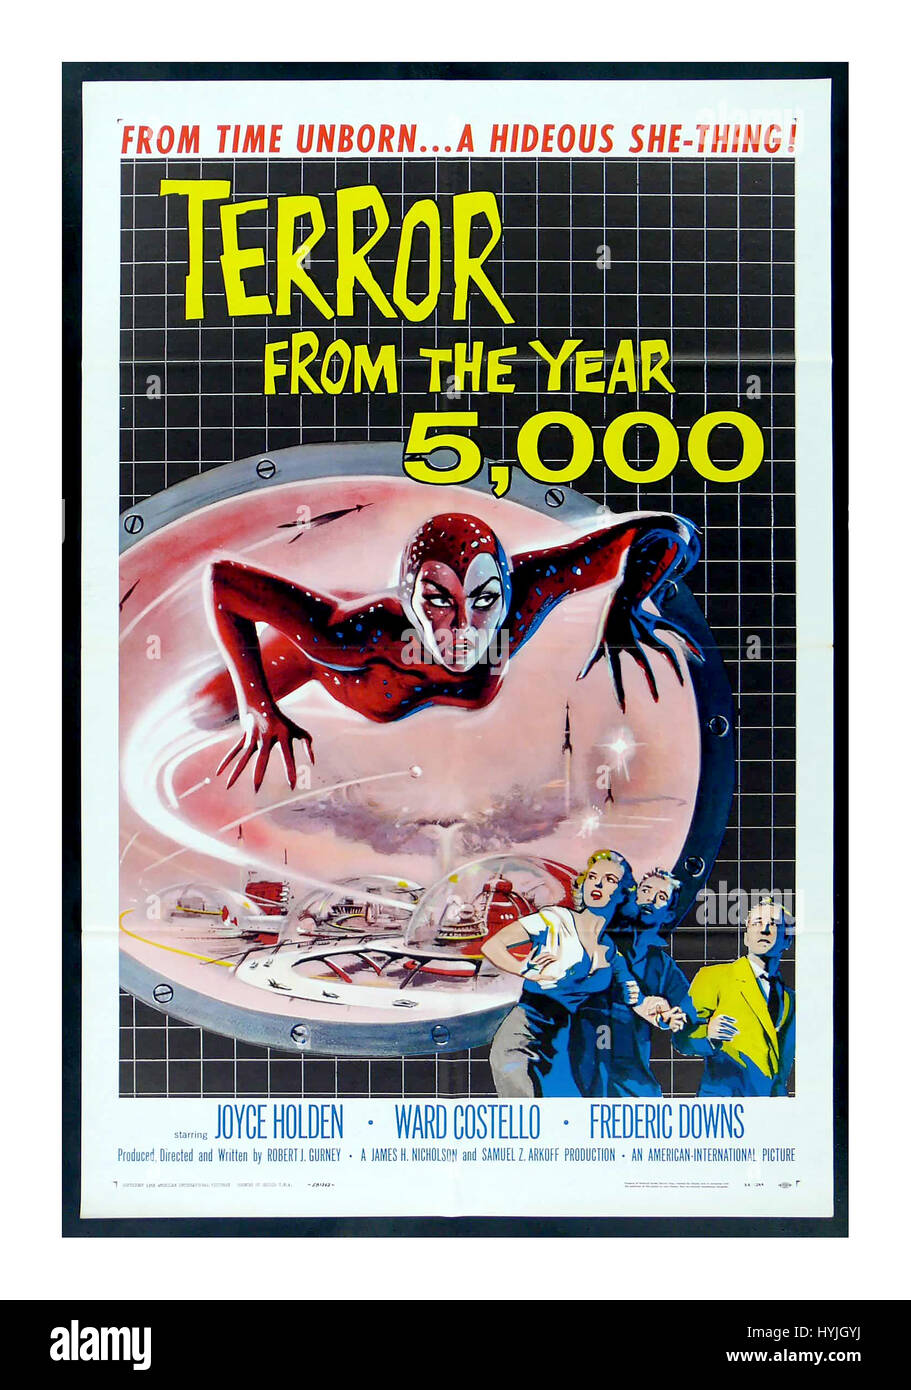 From time unborn…a hideous she-thing! A Monster American Sci-fi “Terror from the year 5000” movie directed by Robert J. Gurney Jr starring Joyce Holden Frederic Downs and Ward Costello. Retro vintage film poster 1958 Stock Photo